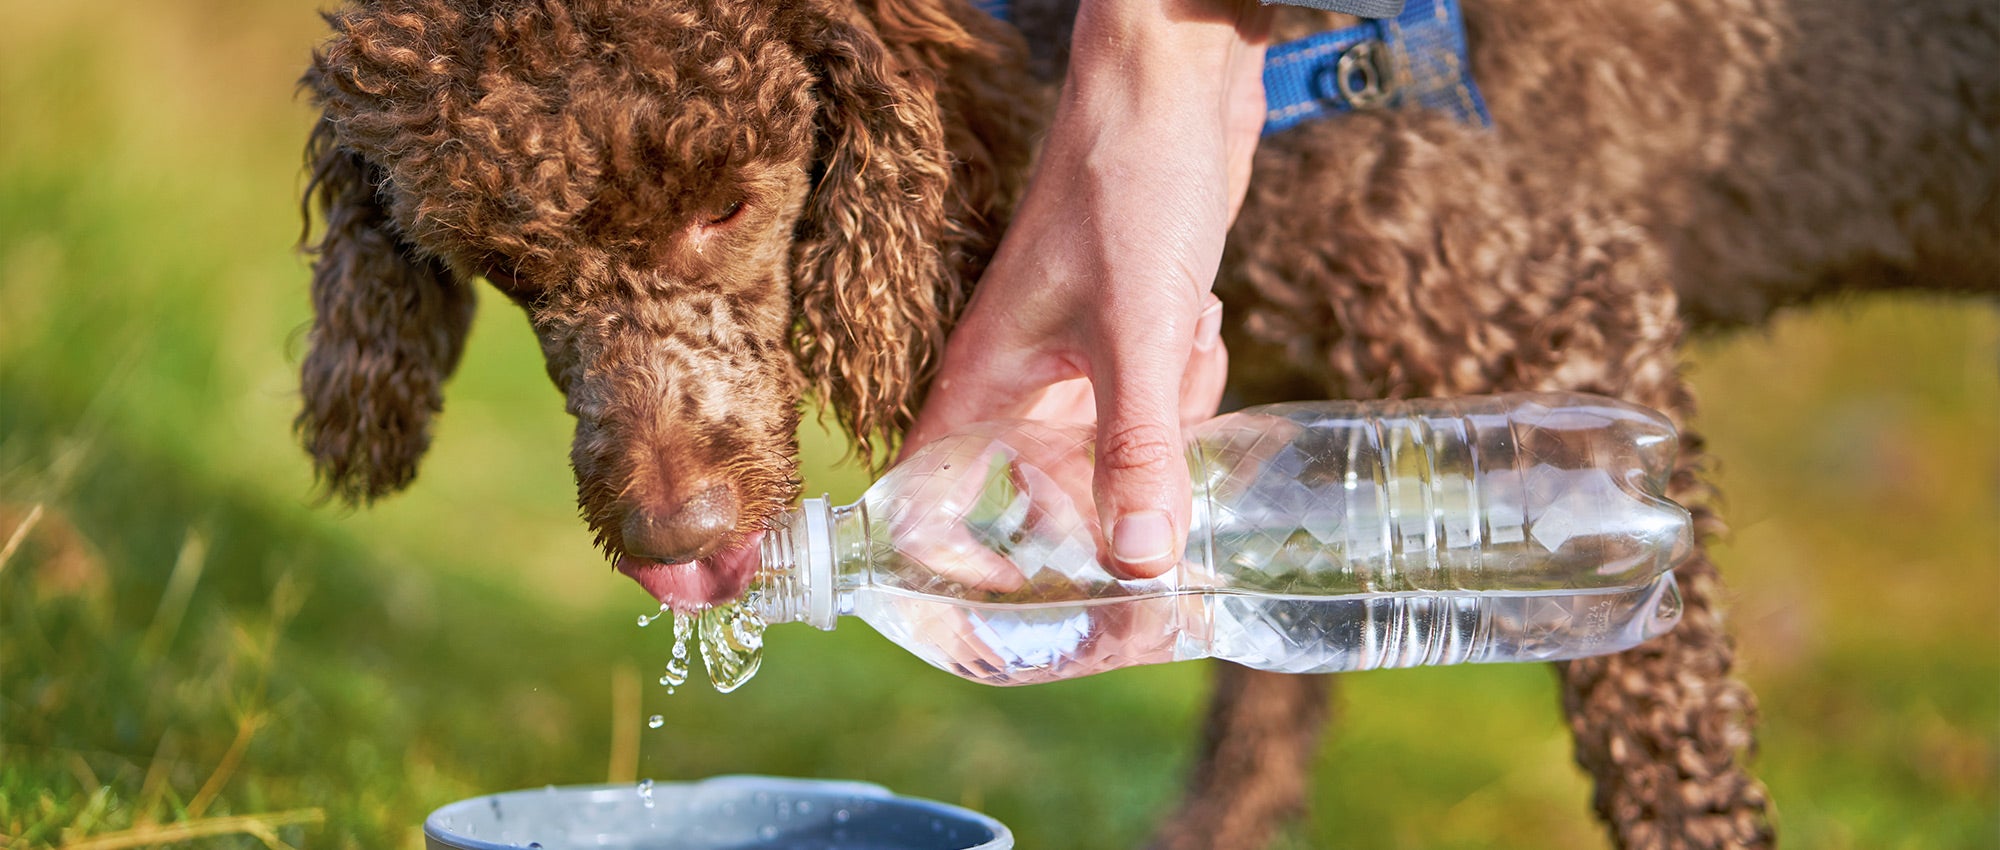 Keep pets safe in the heat | The Humane Society of the United States